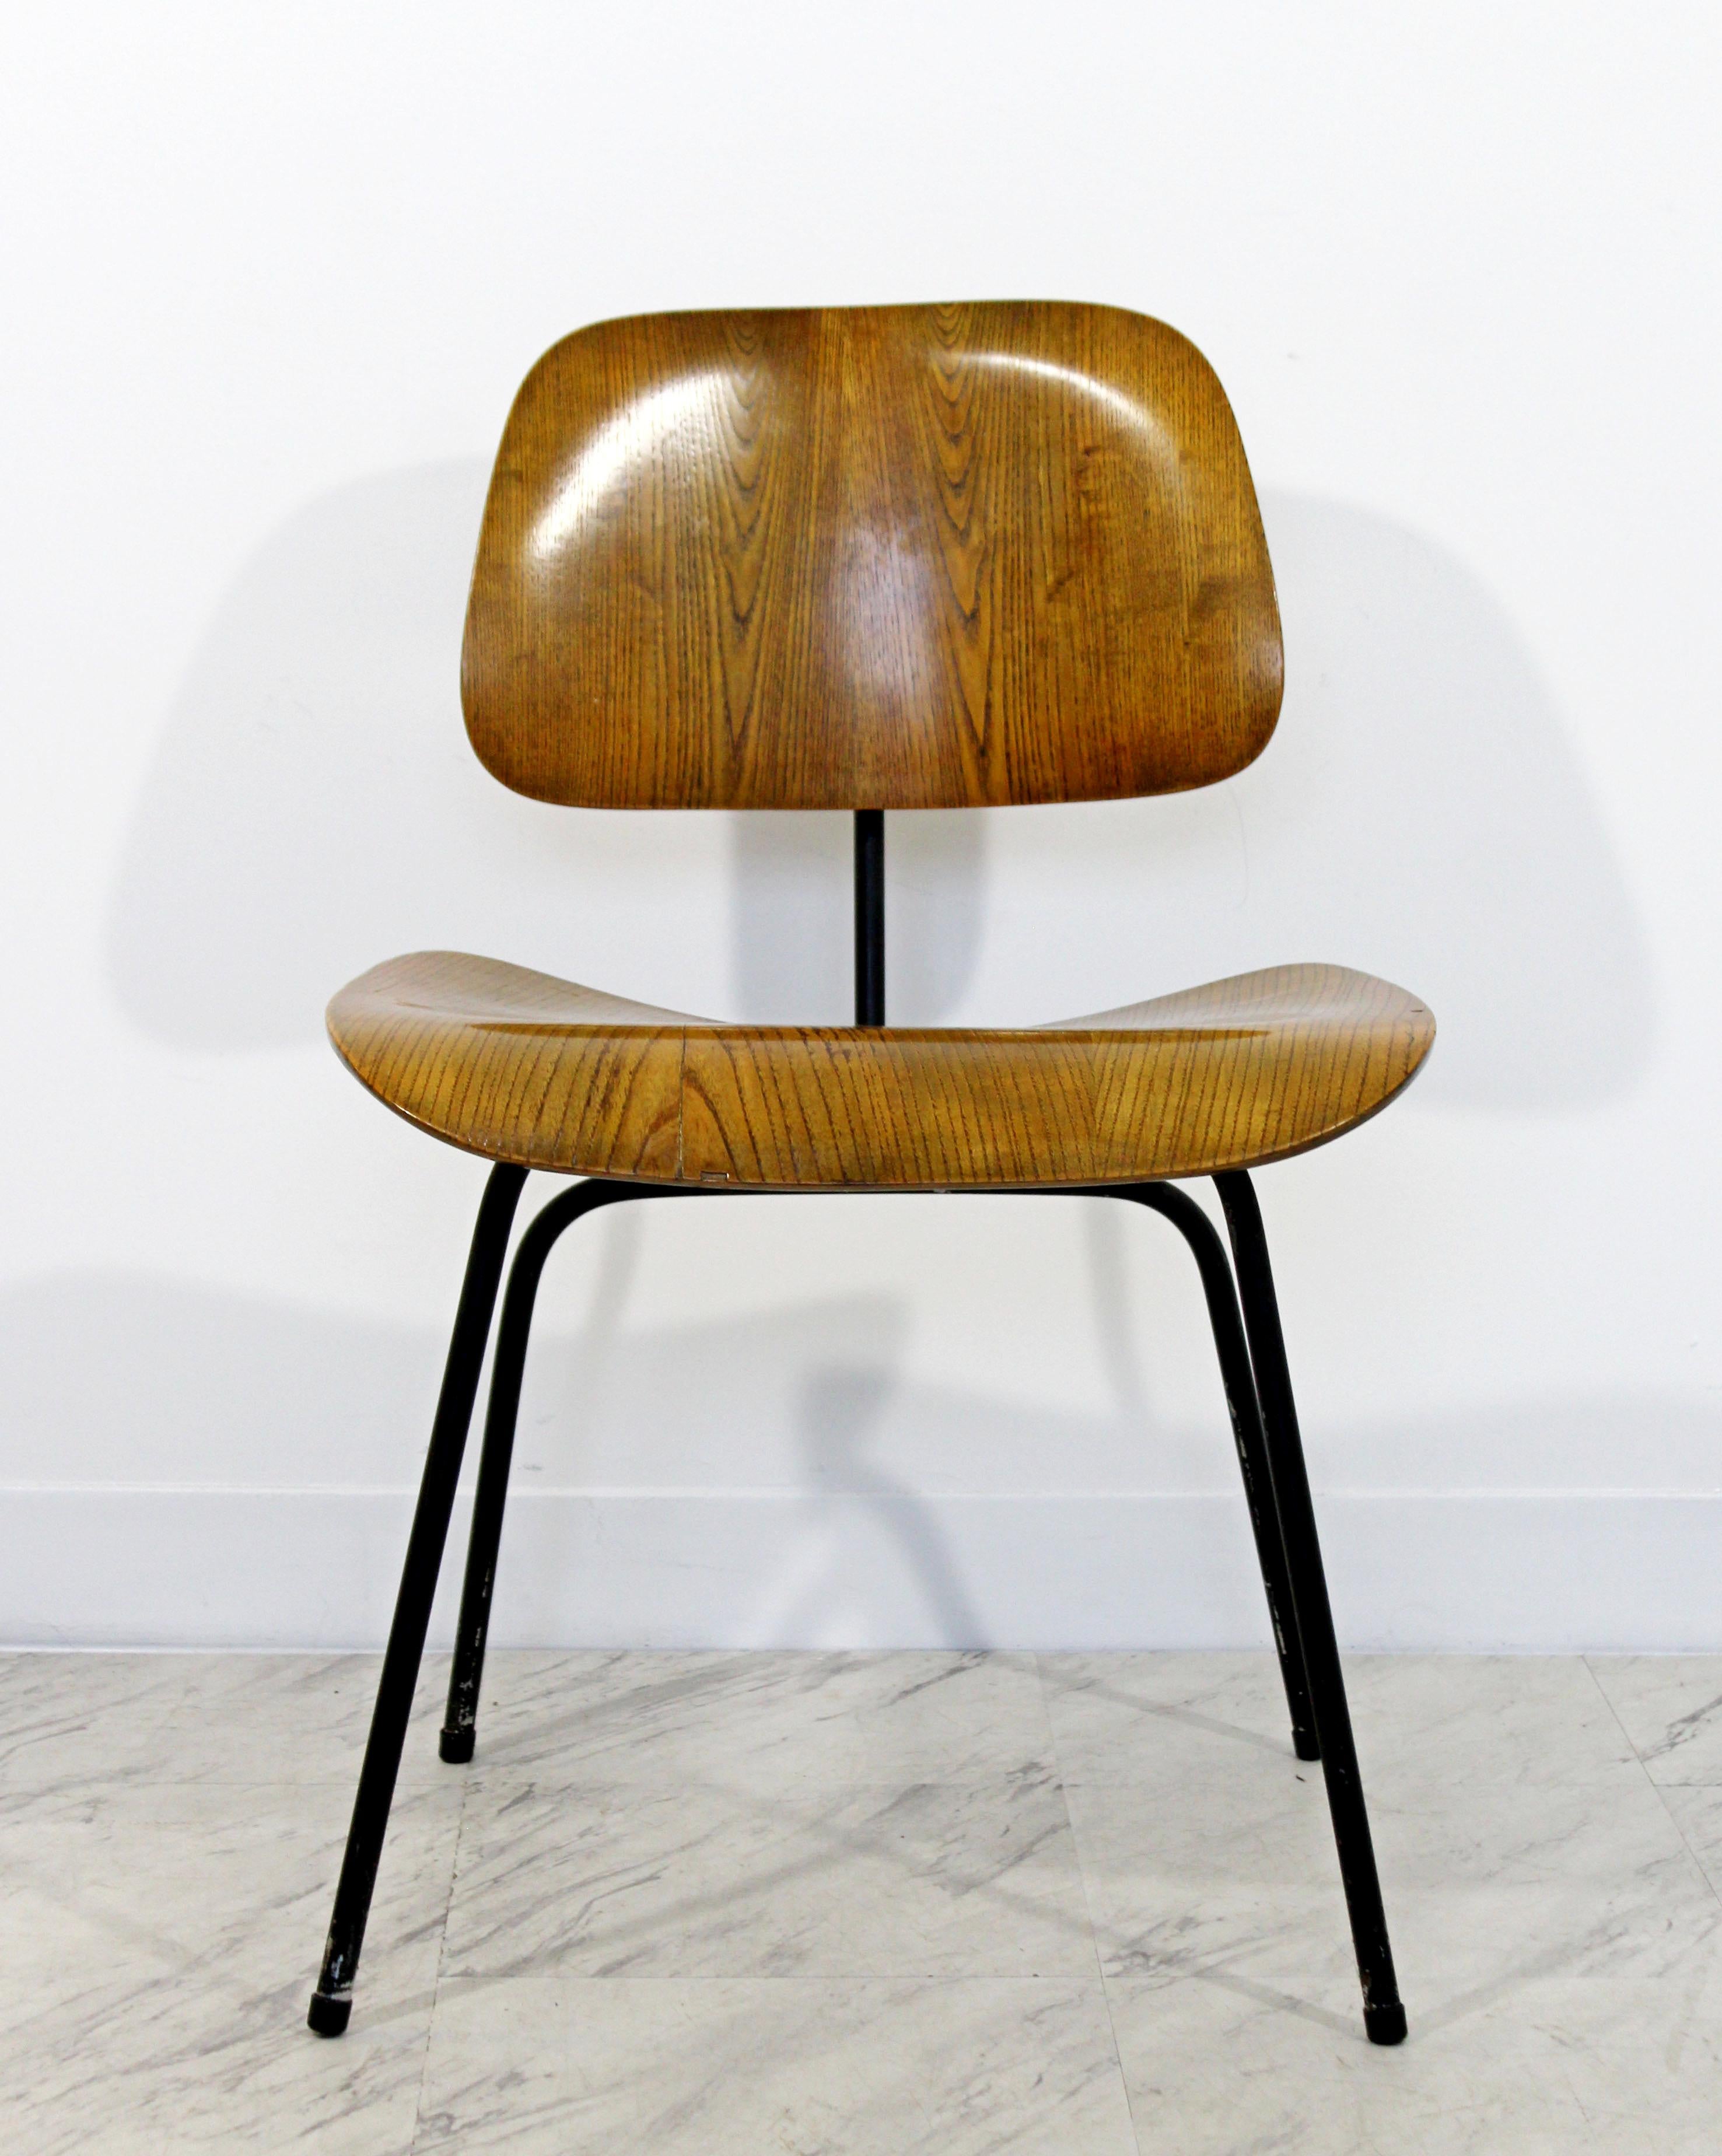 For your consideration is a phenomenal, early, ash DCM side chair, by Charles Eames for Herman Miller, circa the 1950s. In very good condition. The dimensions are 19.5